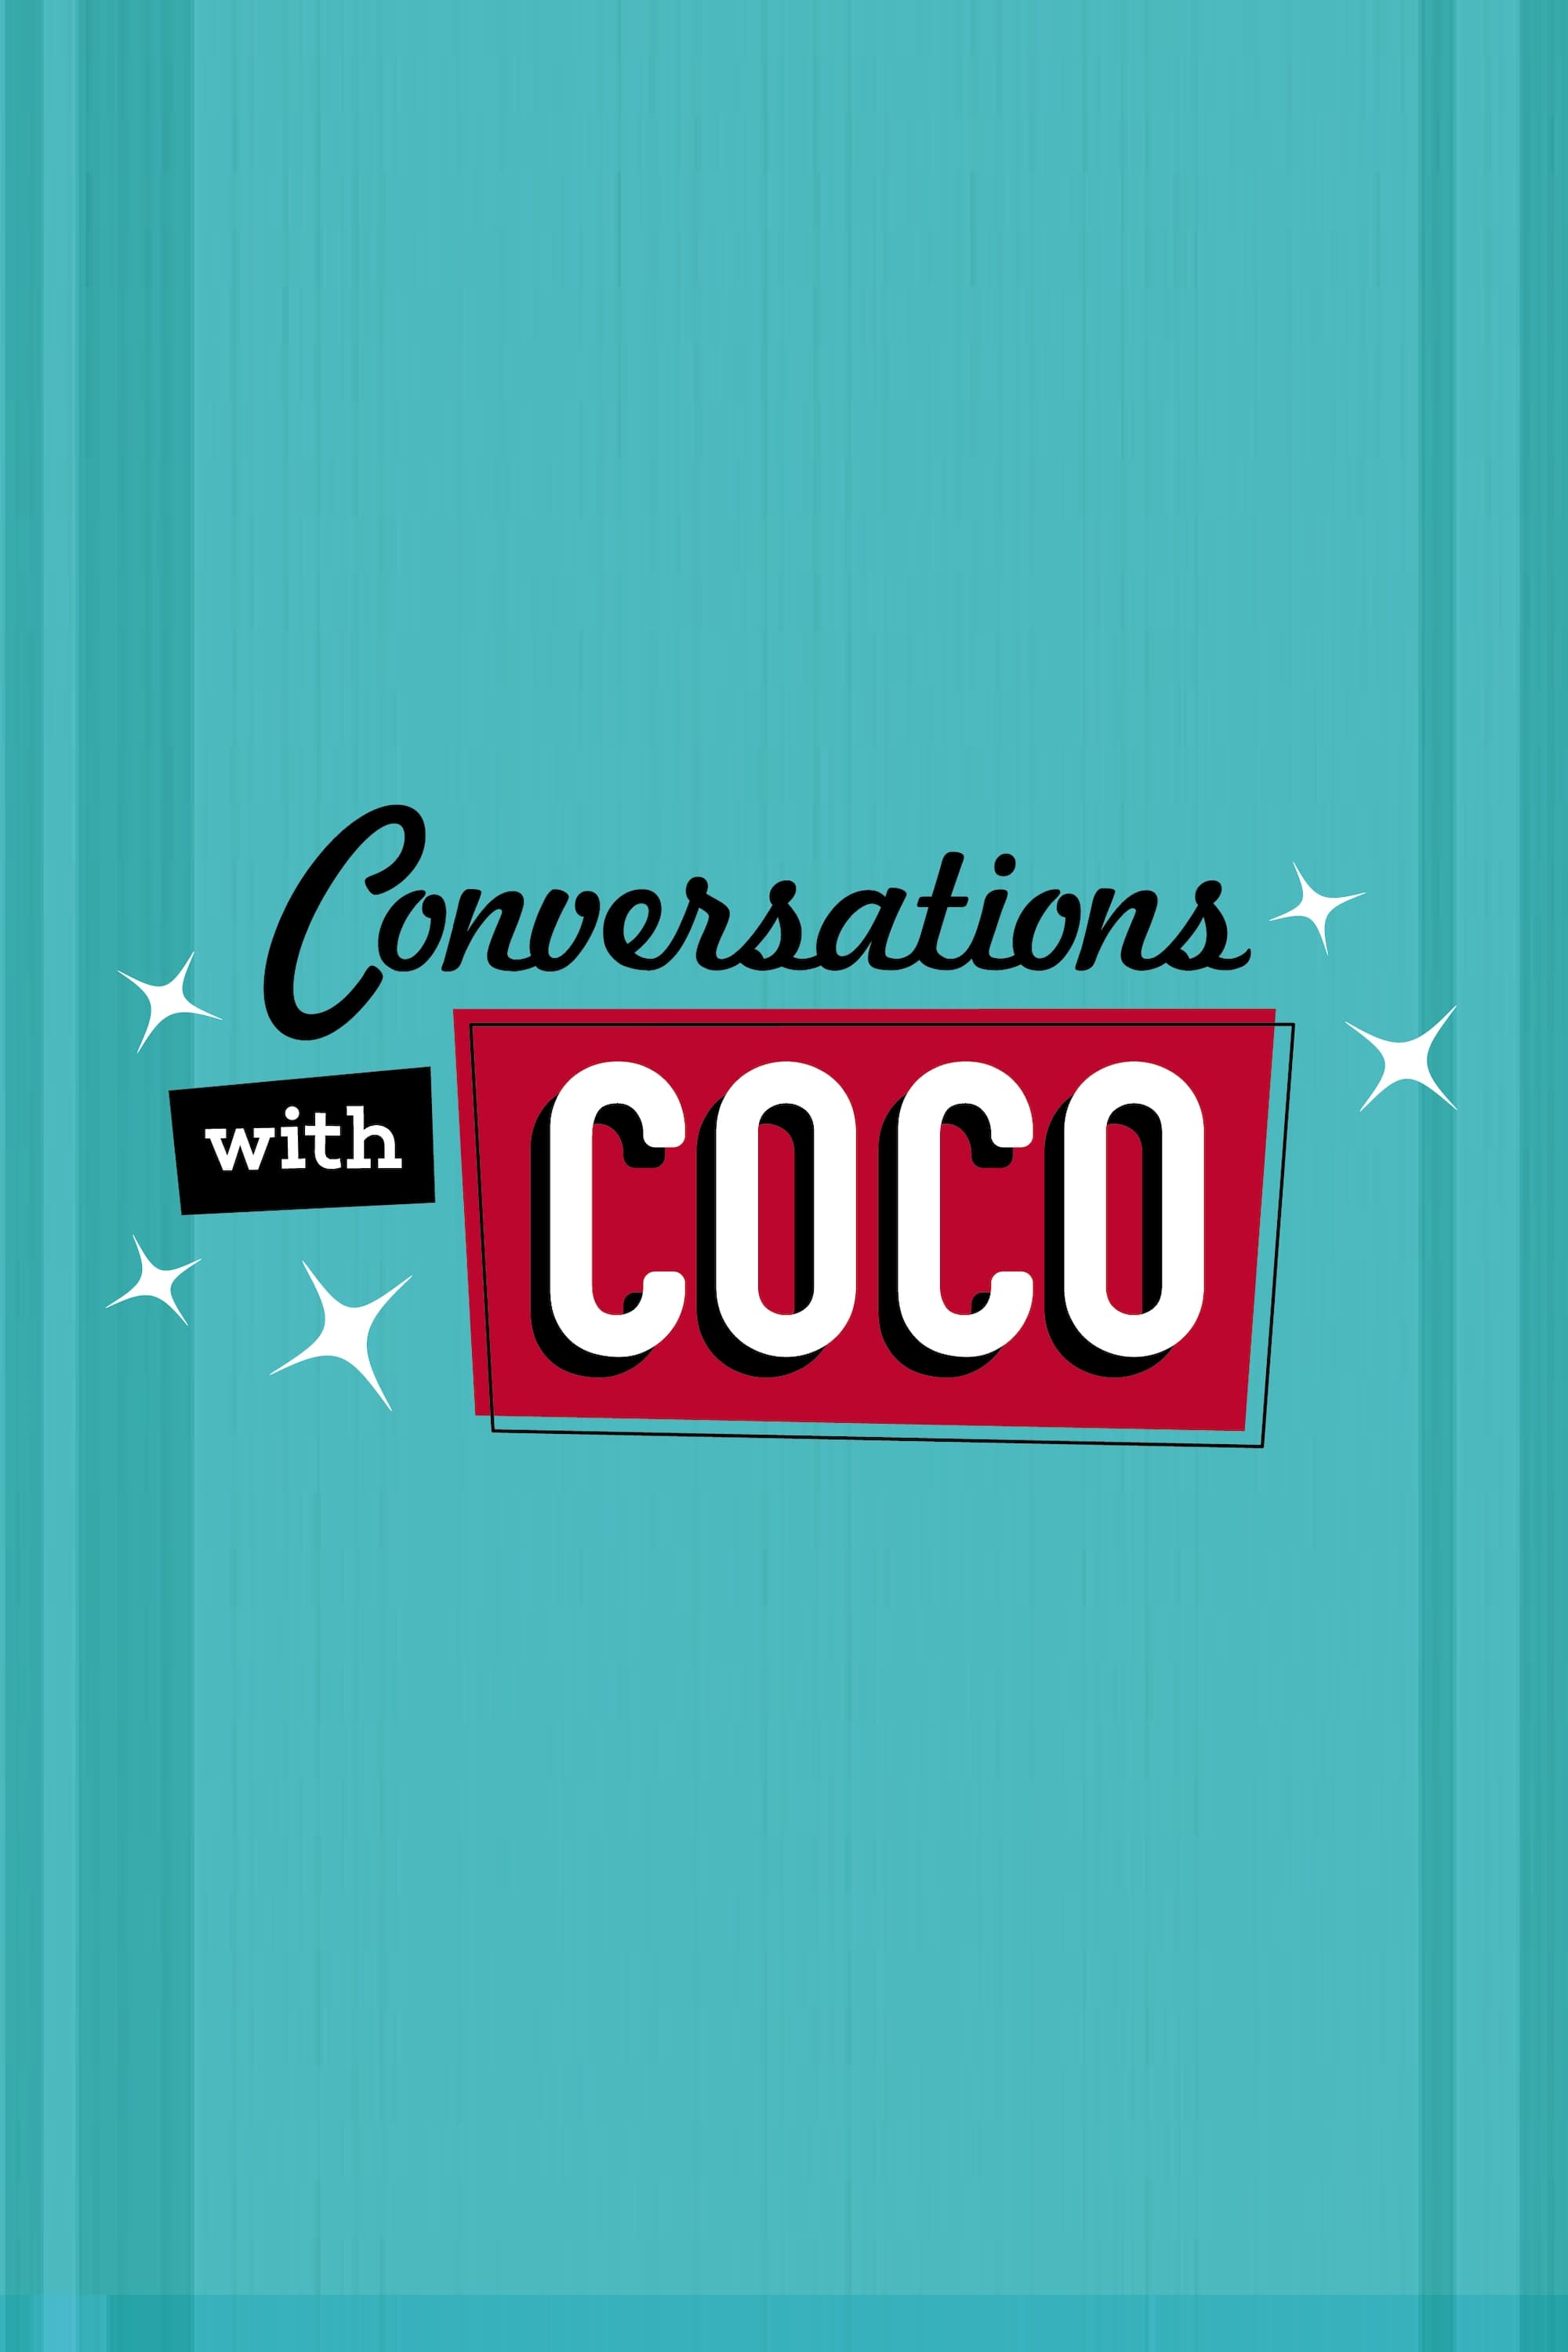 Conversations with Coco